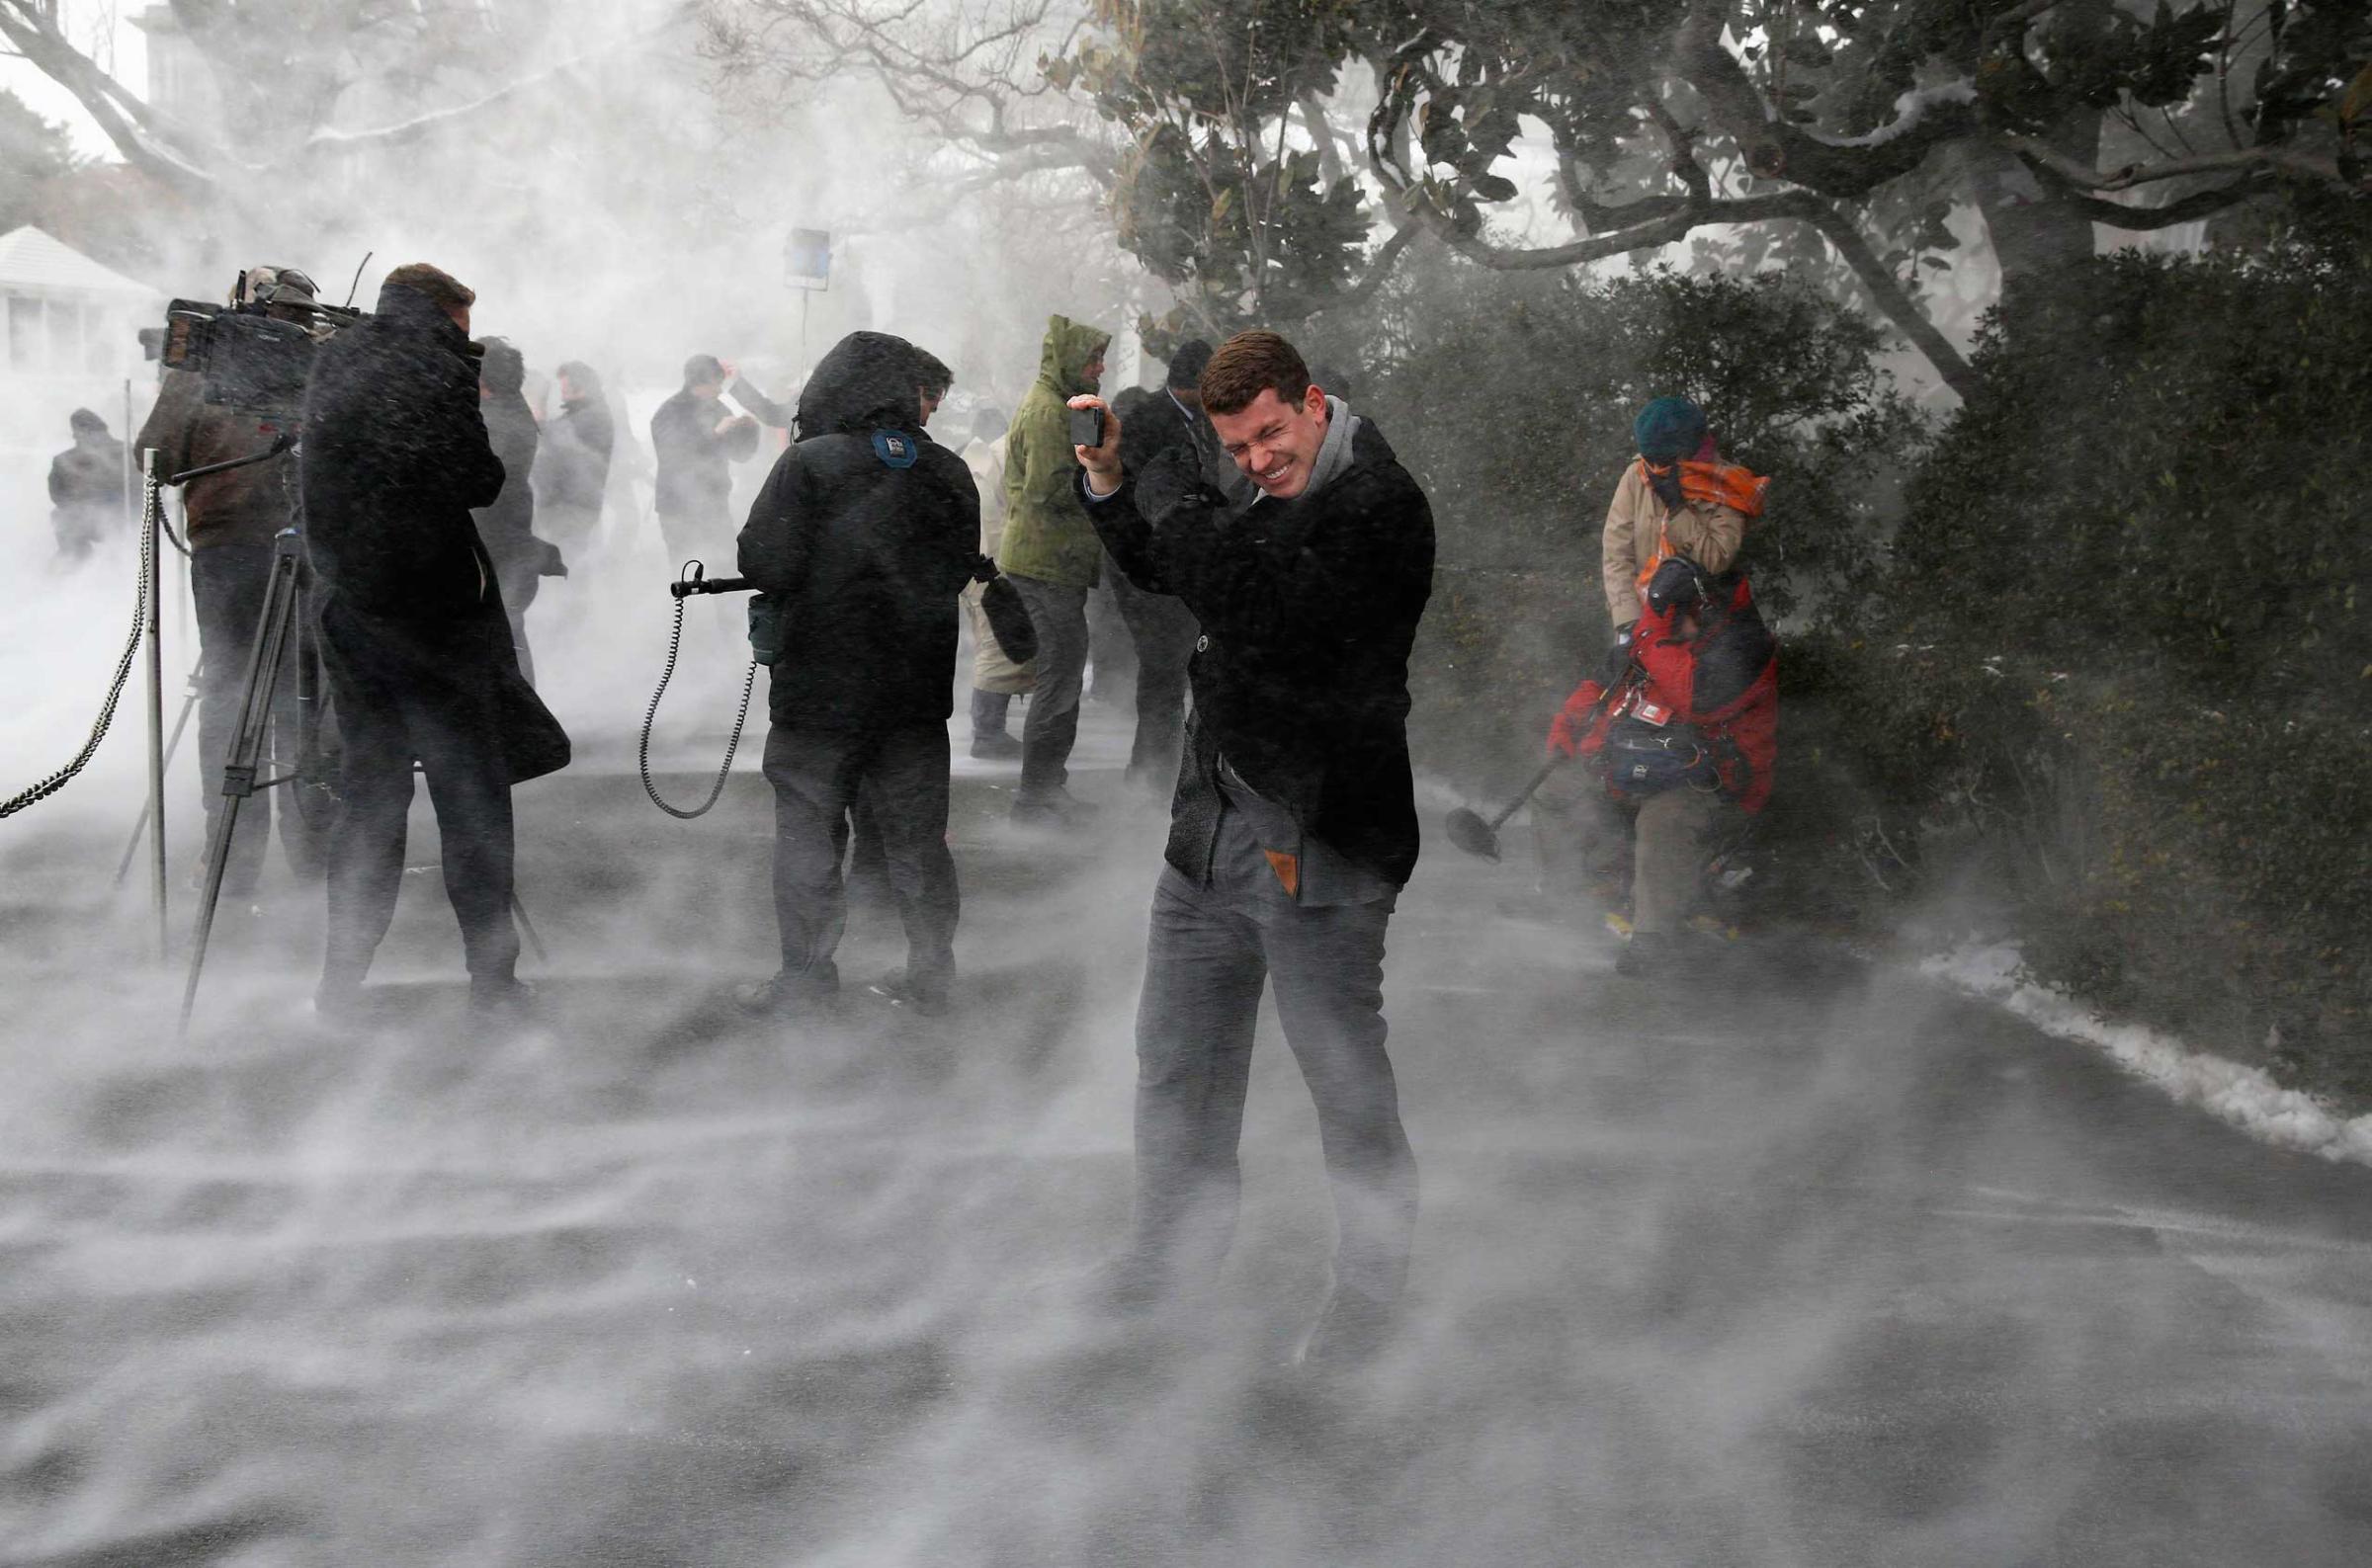 Jan. 7, 2015. Members of the press, including NBC's Evan Dixon, face the blowing snow caused by Marine One as it landed on the South Lawn before picking up U.S. President Barack Obama at the White House in Washington, D.C.